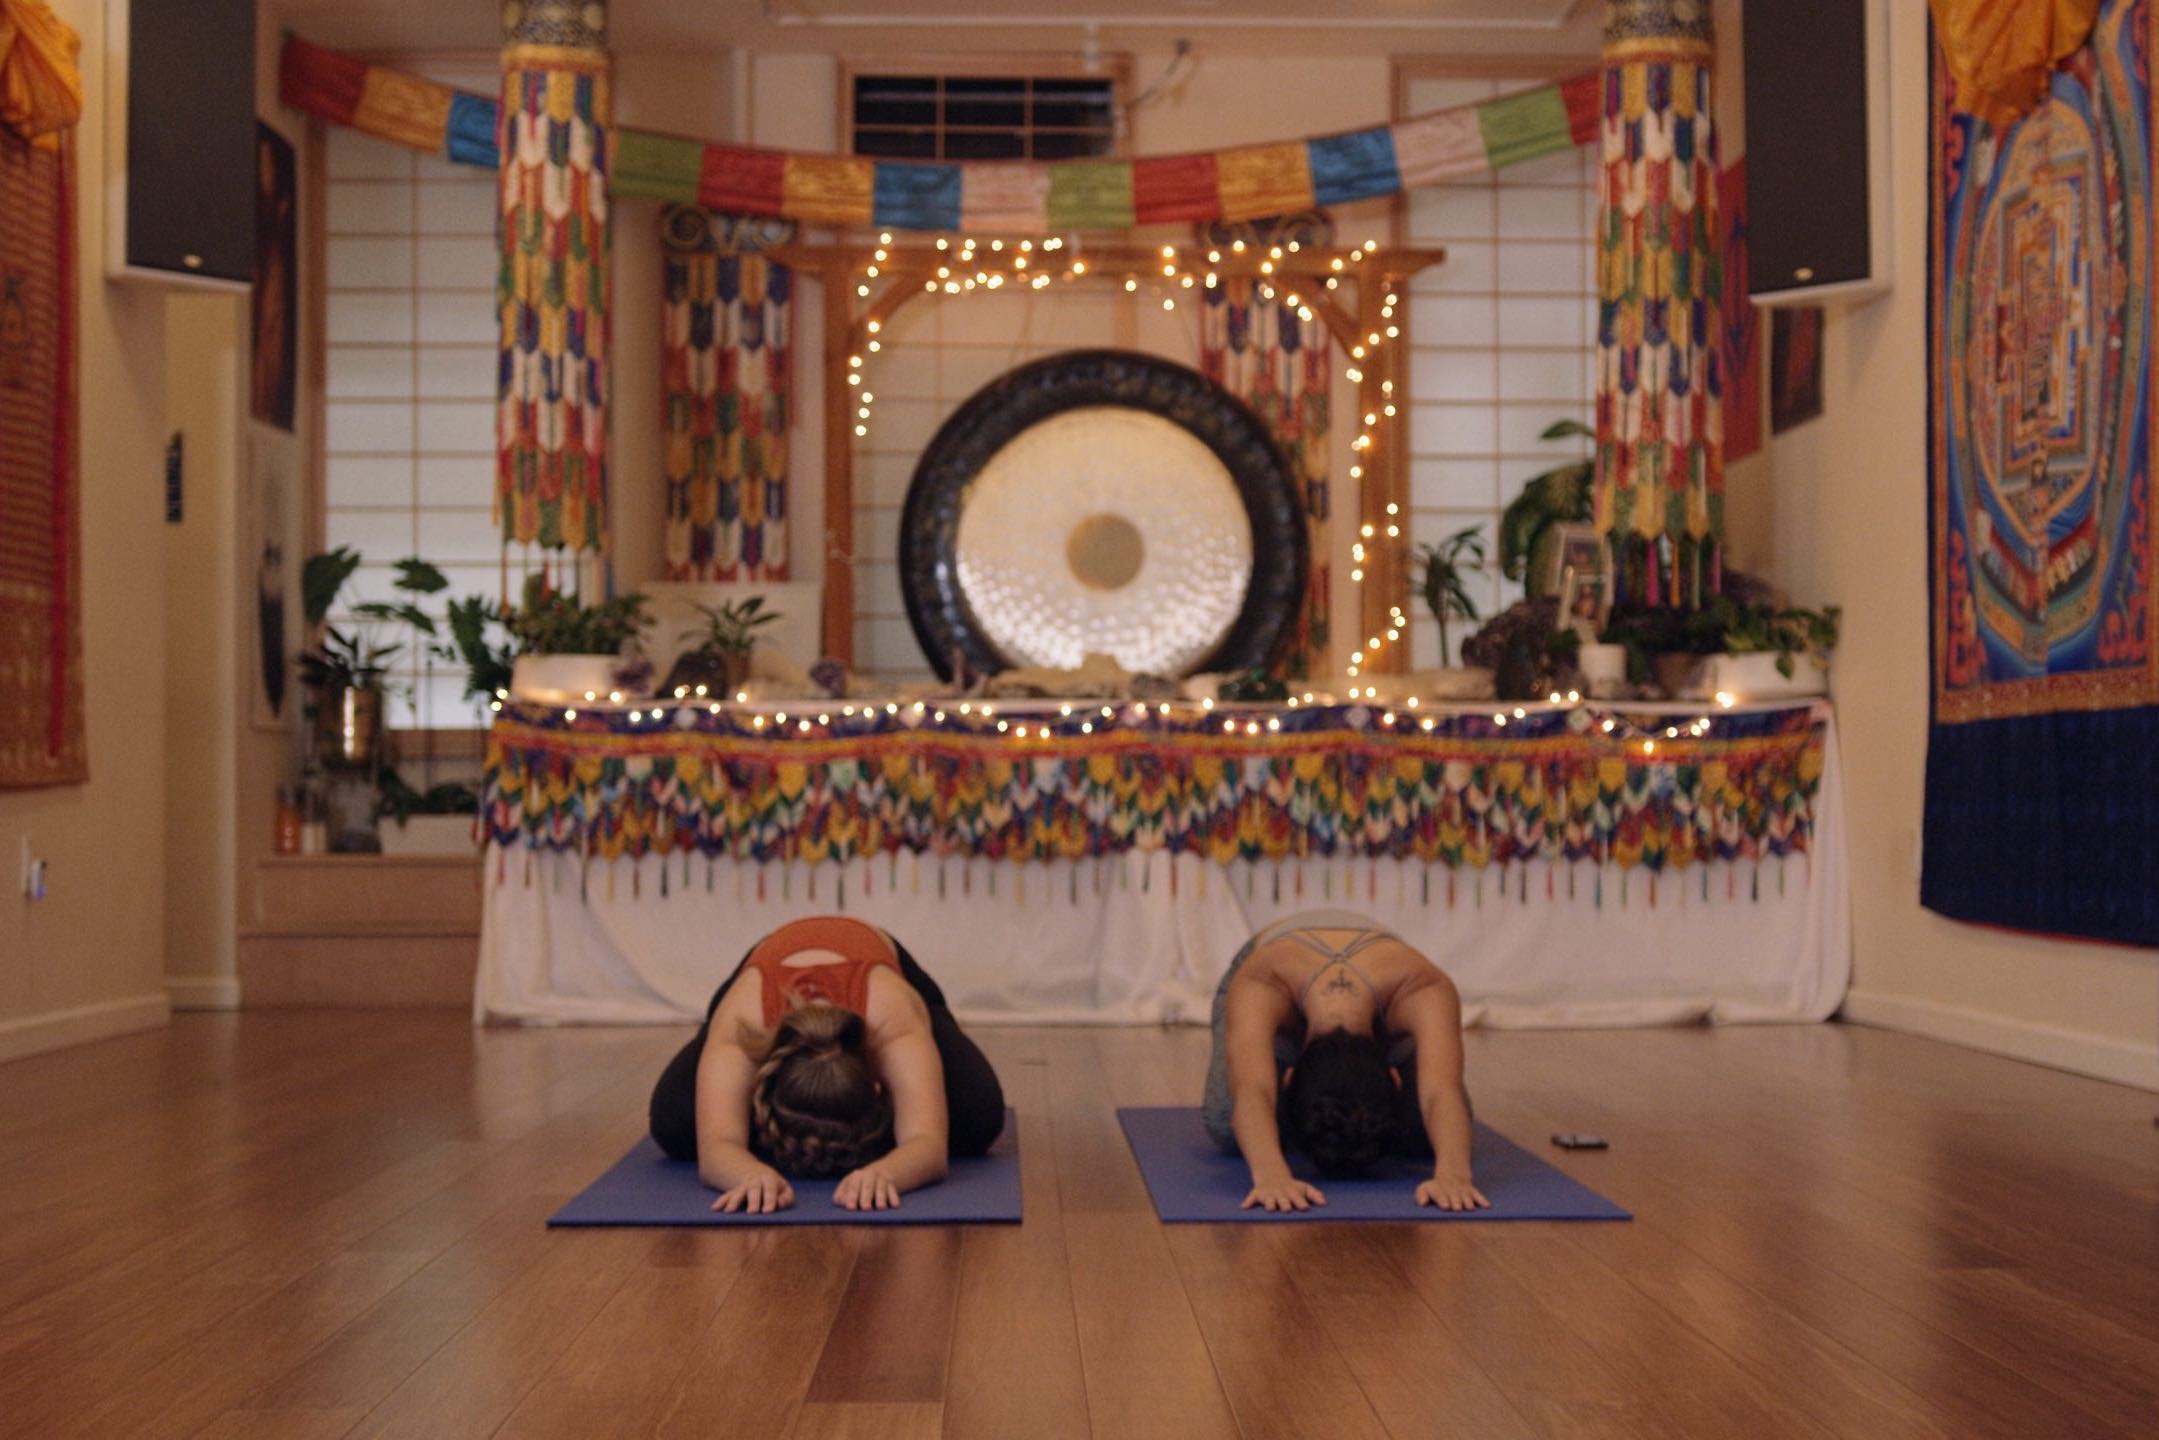 Production Resources Locations NYC with two women doing a pose on yoga mats